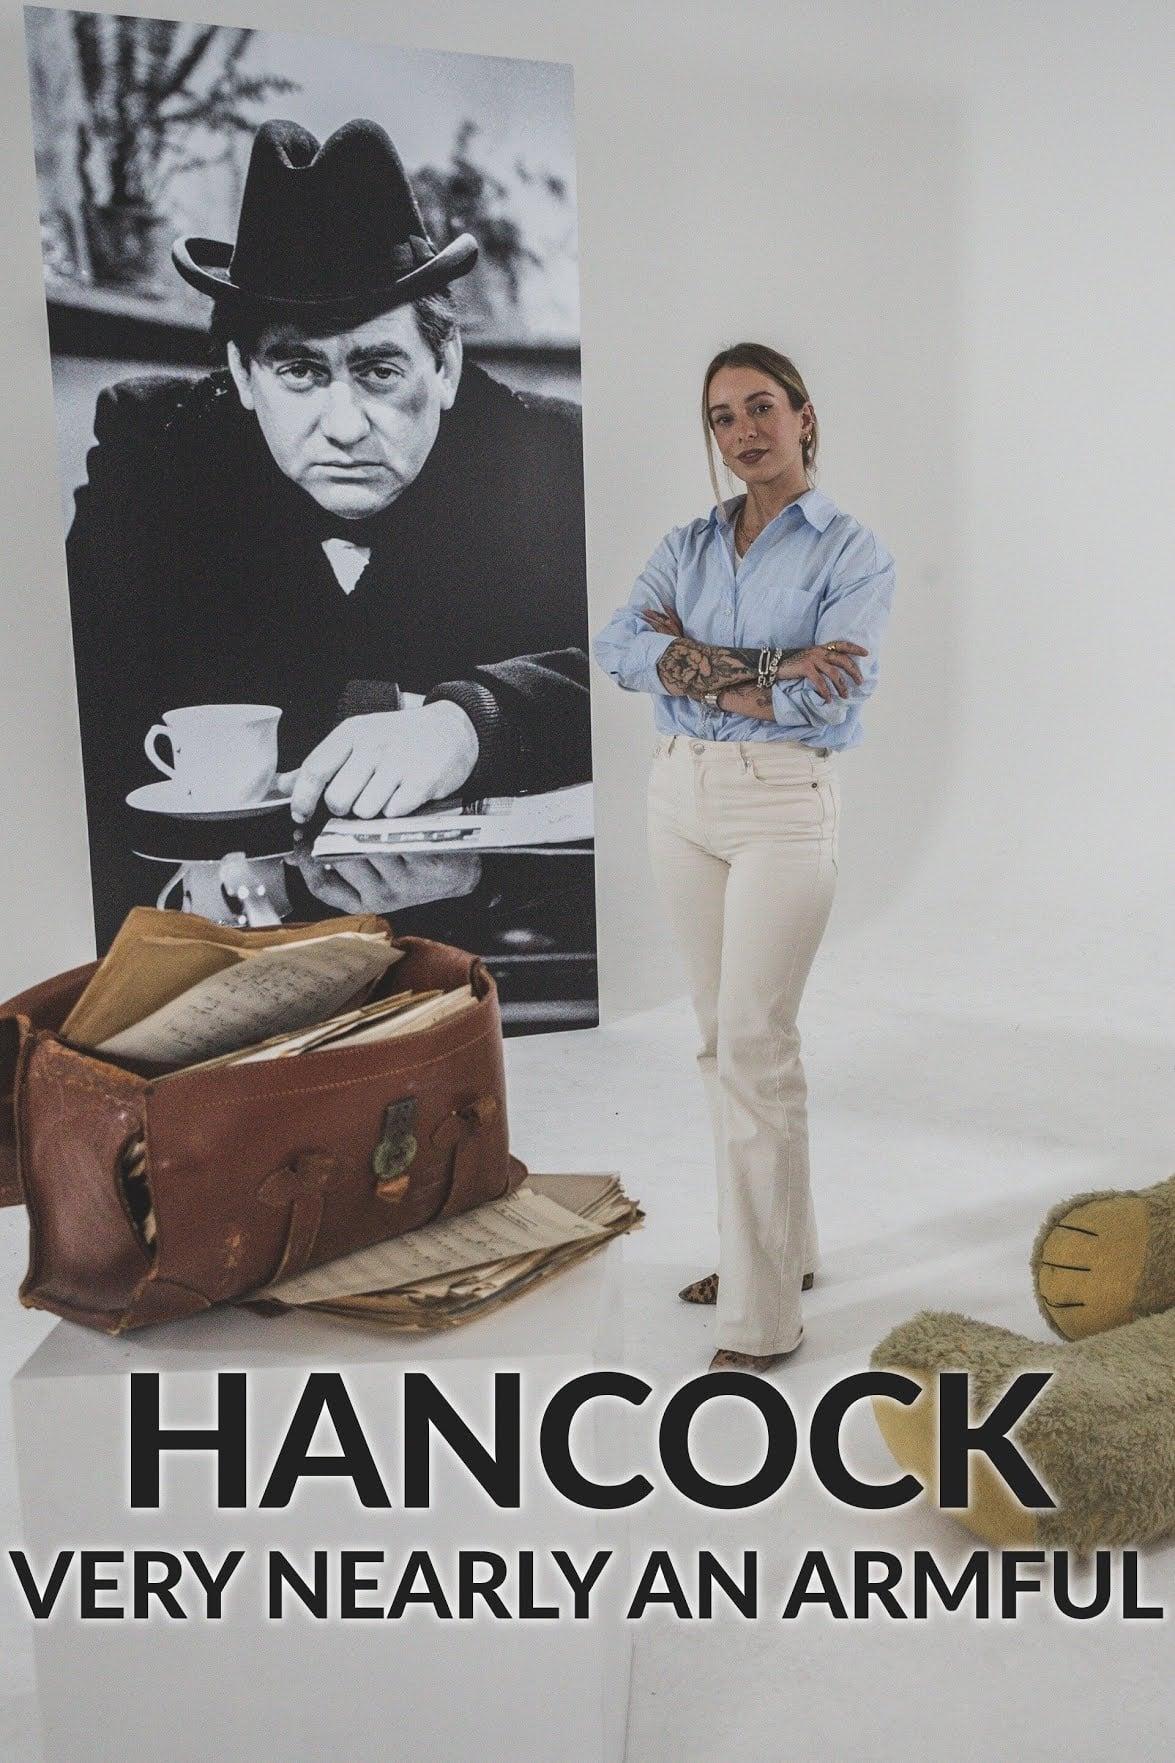 Hancock: Very Nearly an Armful poster